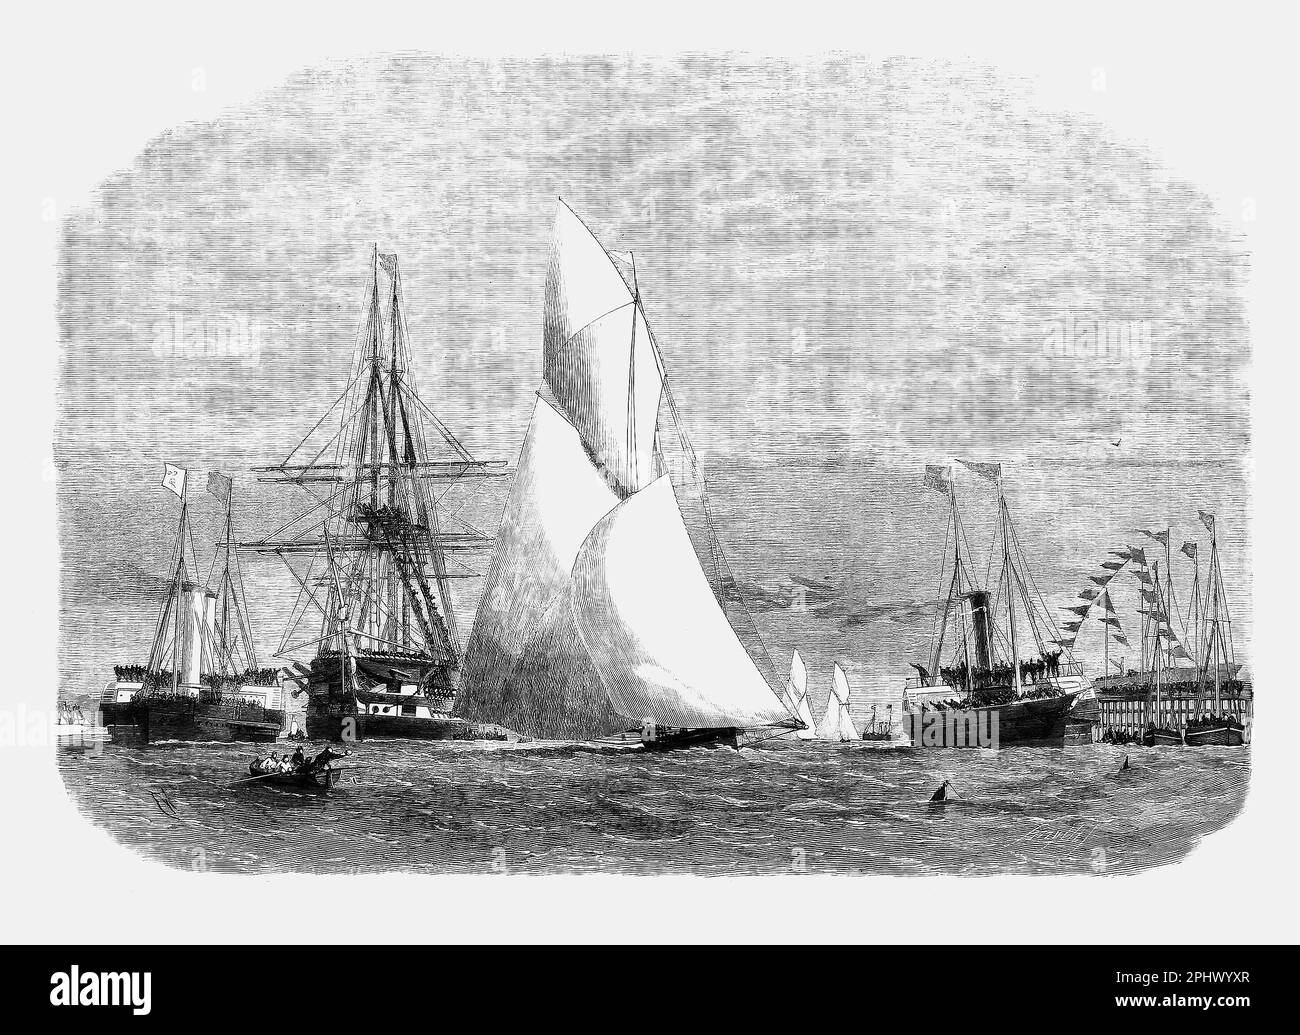 The Royal London Yacht Club Ocean Yacht Match (race) from Gravesend to Harwich on June 4th 1864. The illustration shows the 'Volante crossing the finishing line and winning the Cutters' Prize Stock Photo